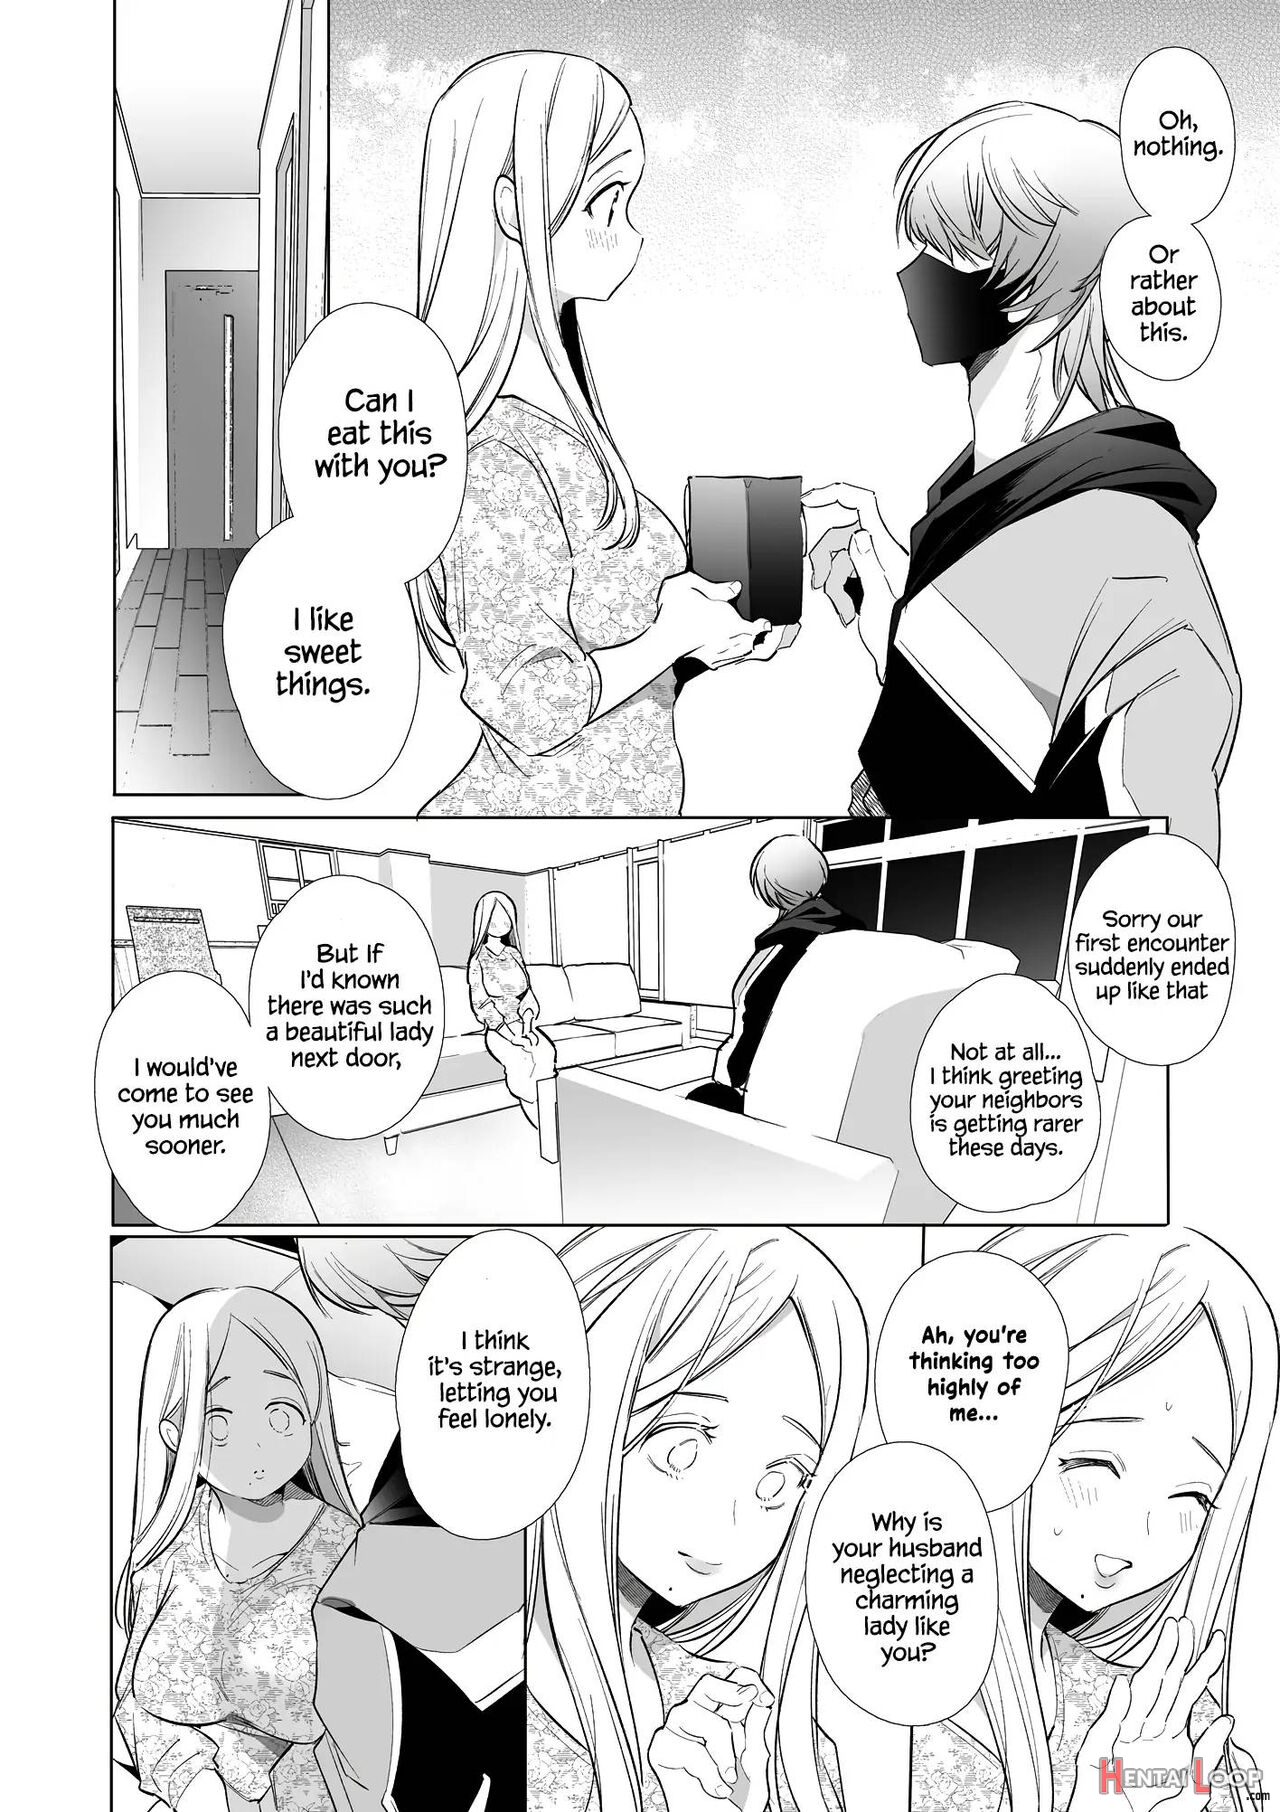 Kana-san Ntr ~ Degradation Of A Housewife By A Guy In An Alter Account ~ page 17